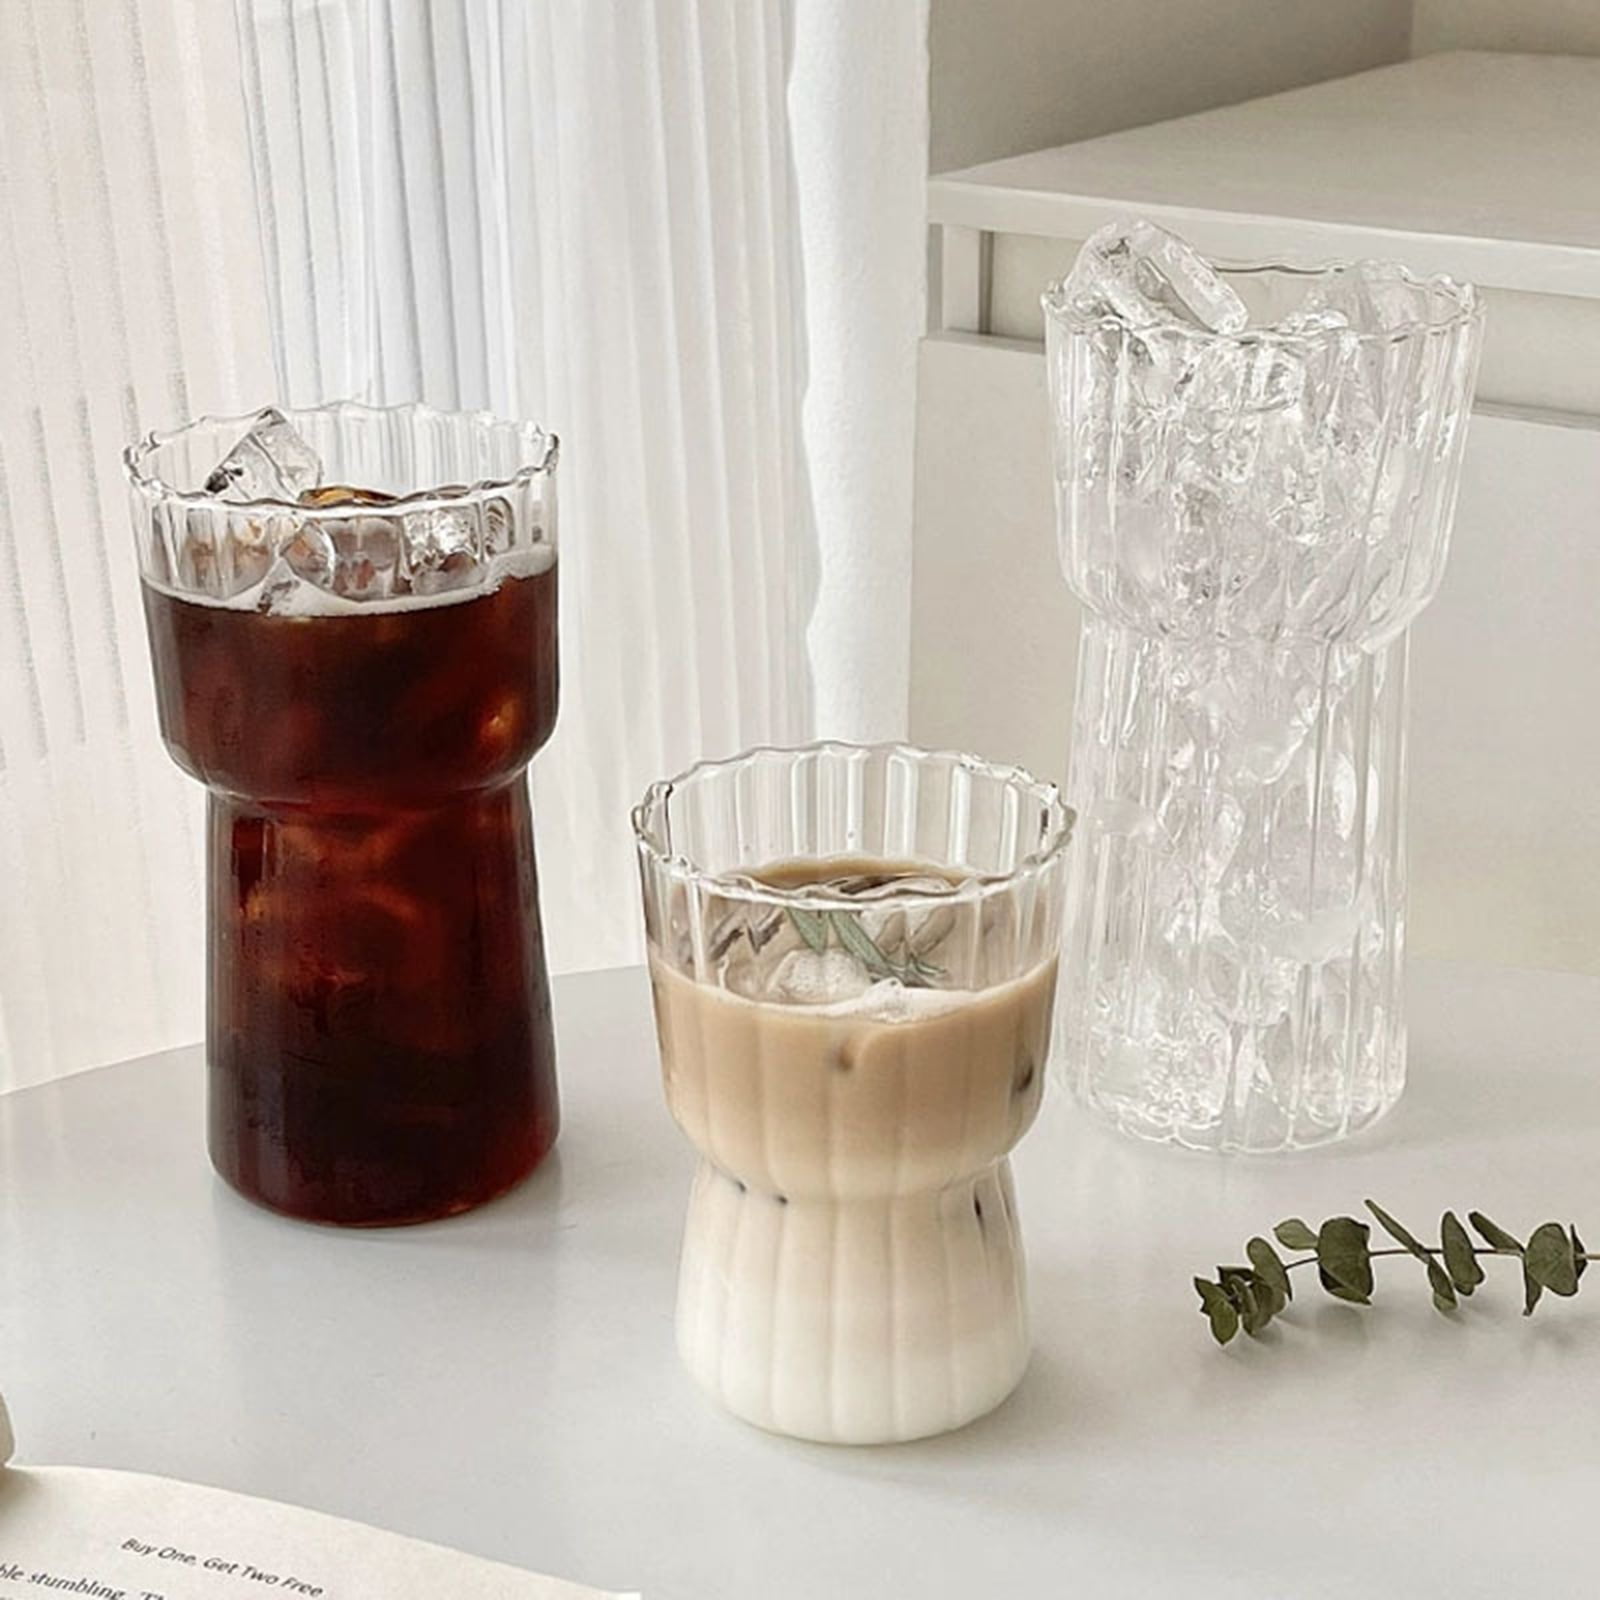 LETBUY Ribbed Glass Cups 4pcs Set with Glass Straw, Vintage Glassware 12 oz, Drinking Glasses for Cocktail Whiskey Water, Iced Coffee Cup, Cute